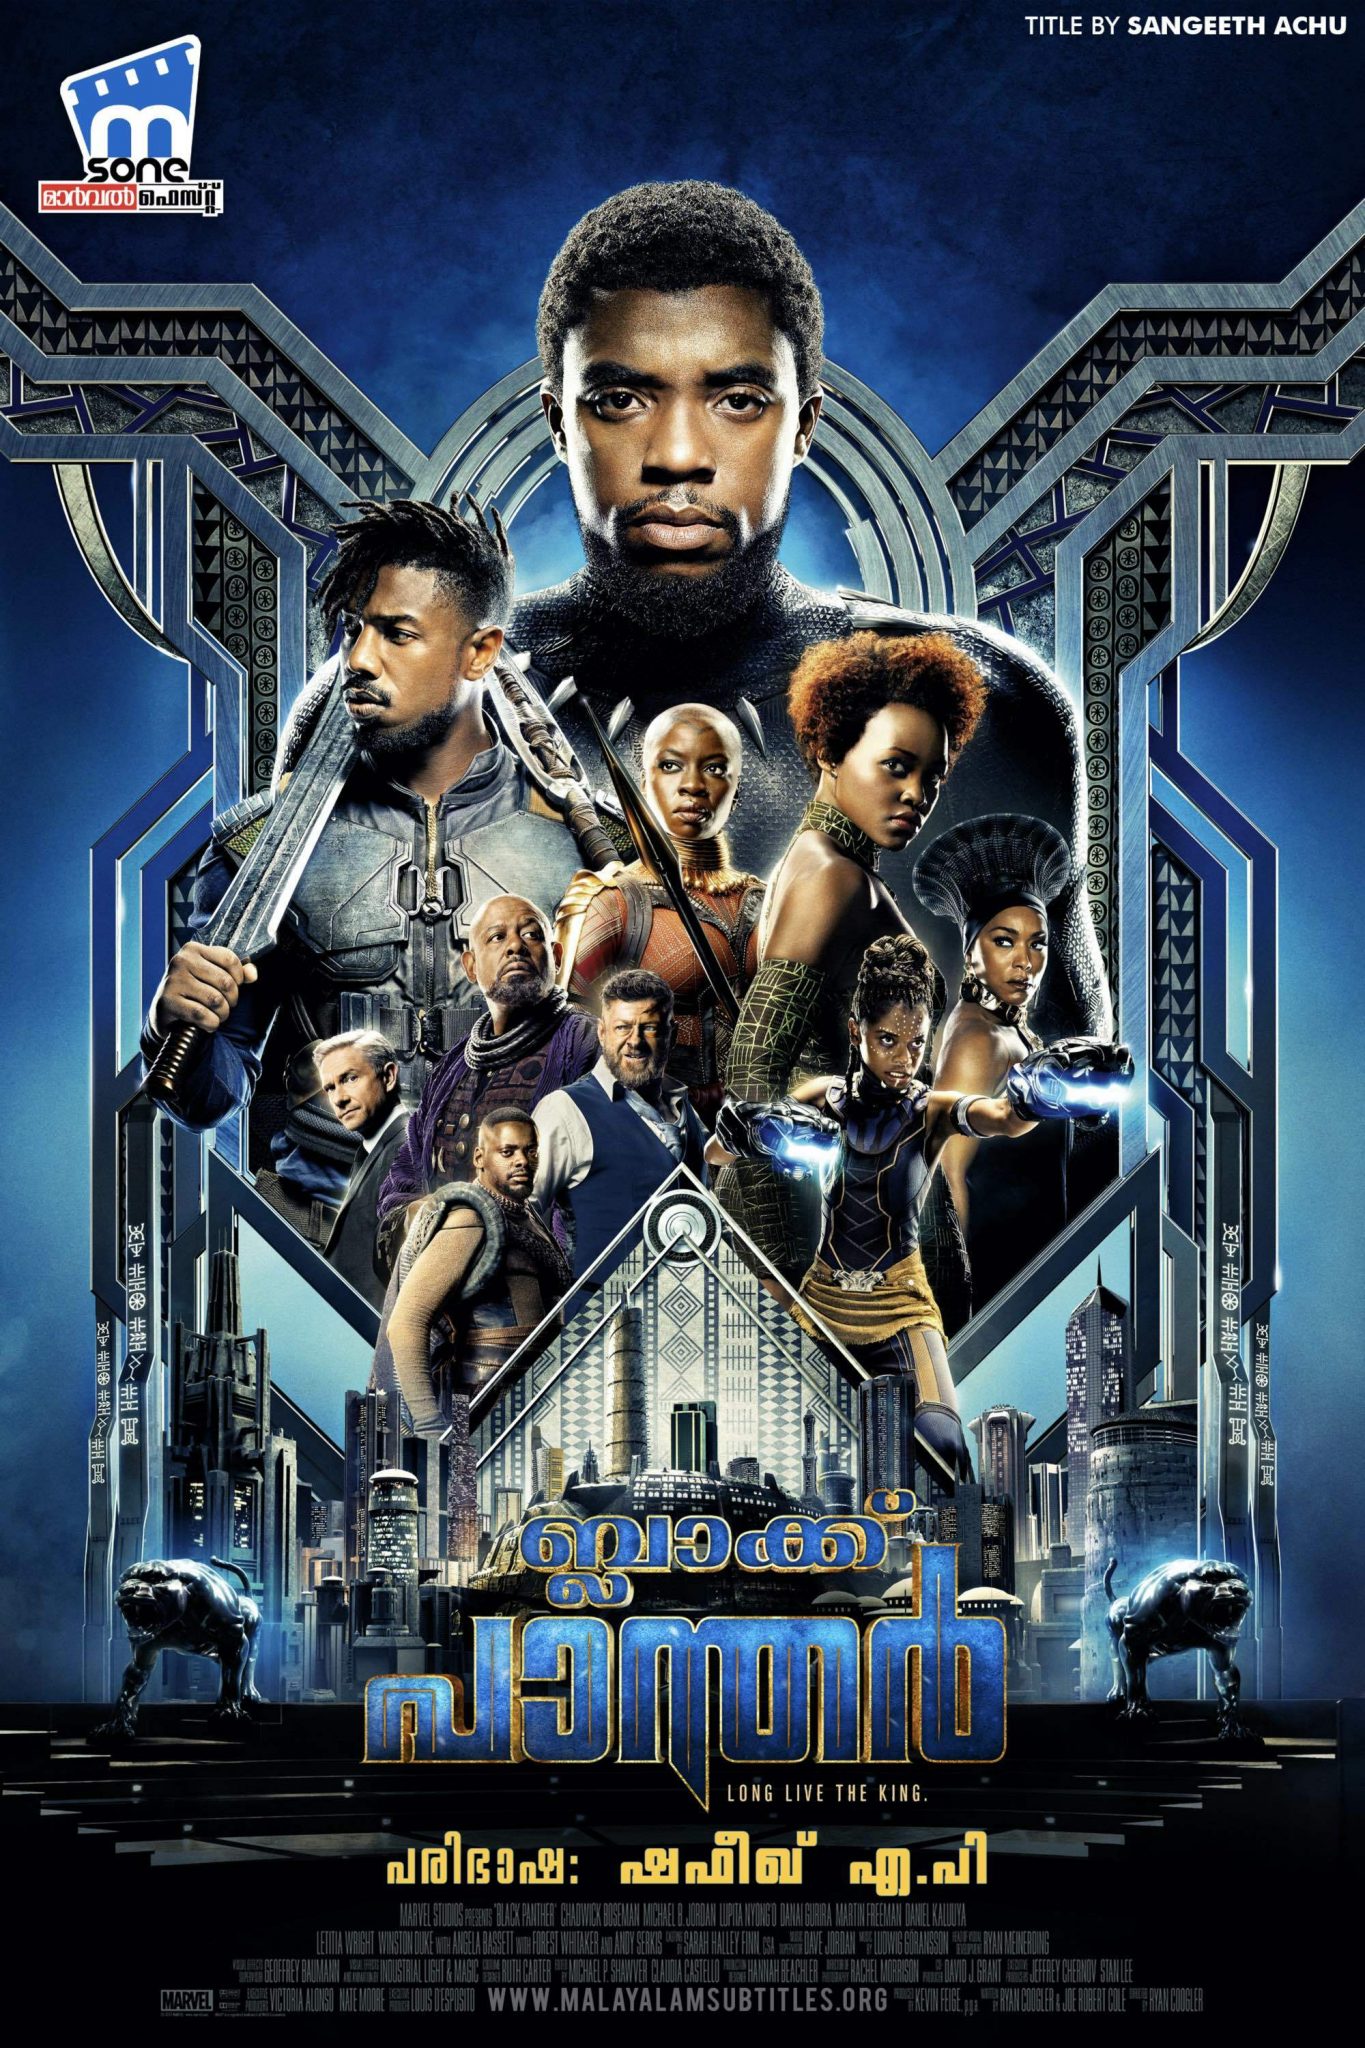 Black Panther Malay Subtitle - Download or Watch Black Panther on your